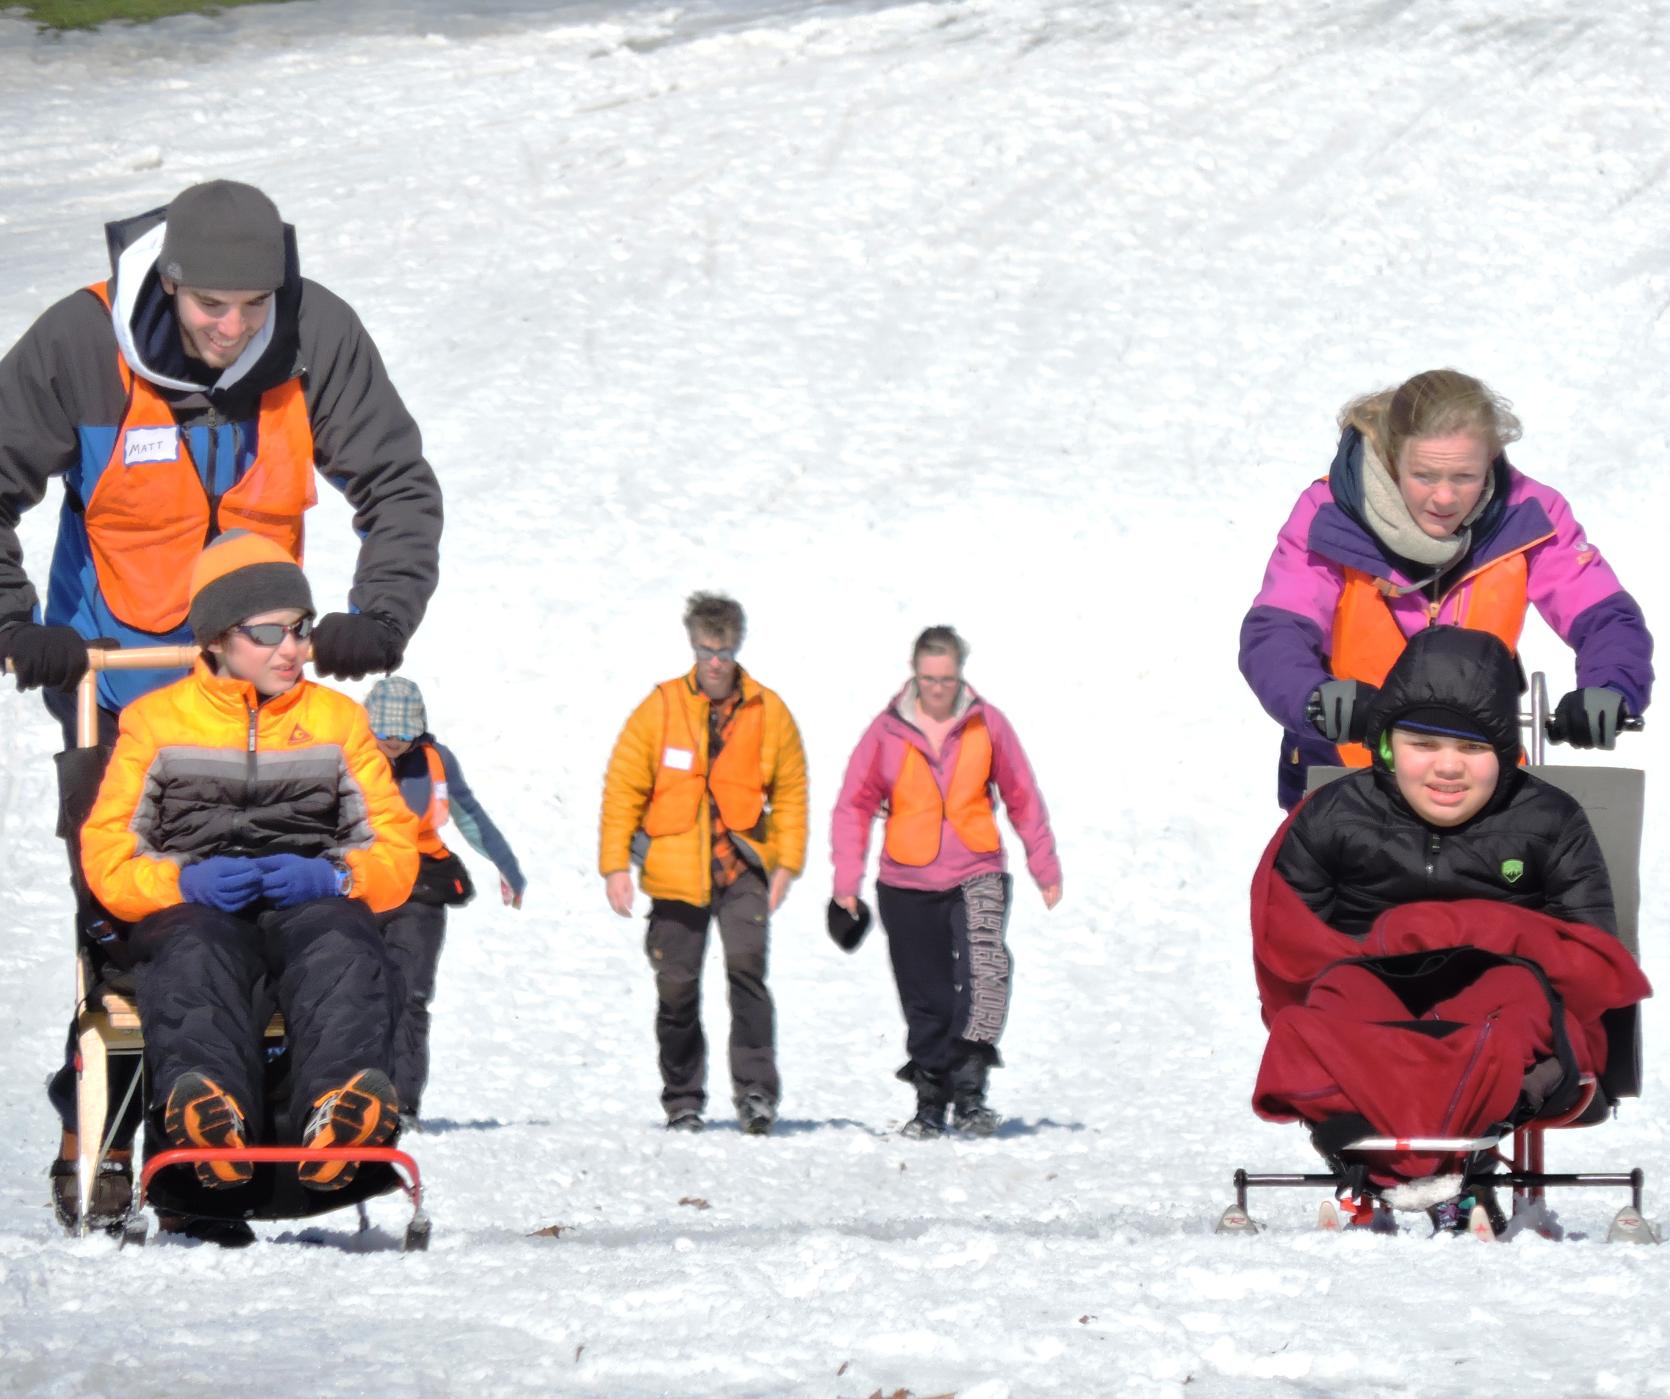 A kick sledder and a sit-skier are being pushed down the hill by volunteers. Behind them, two other people are walking down the hill wearing ice grippers on their shoes.